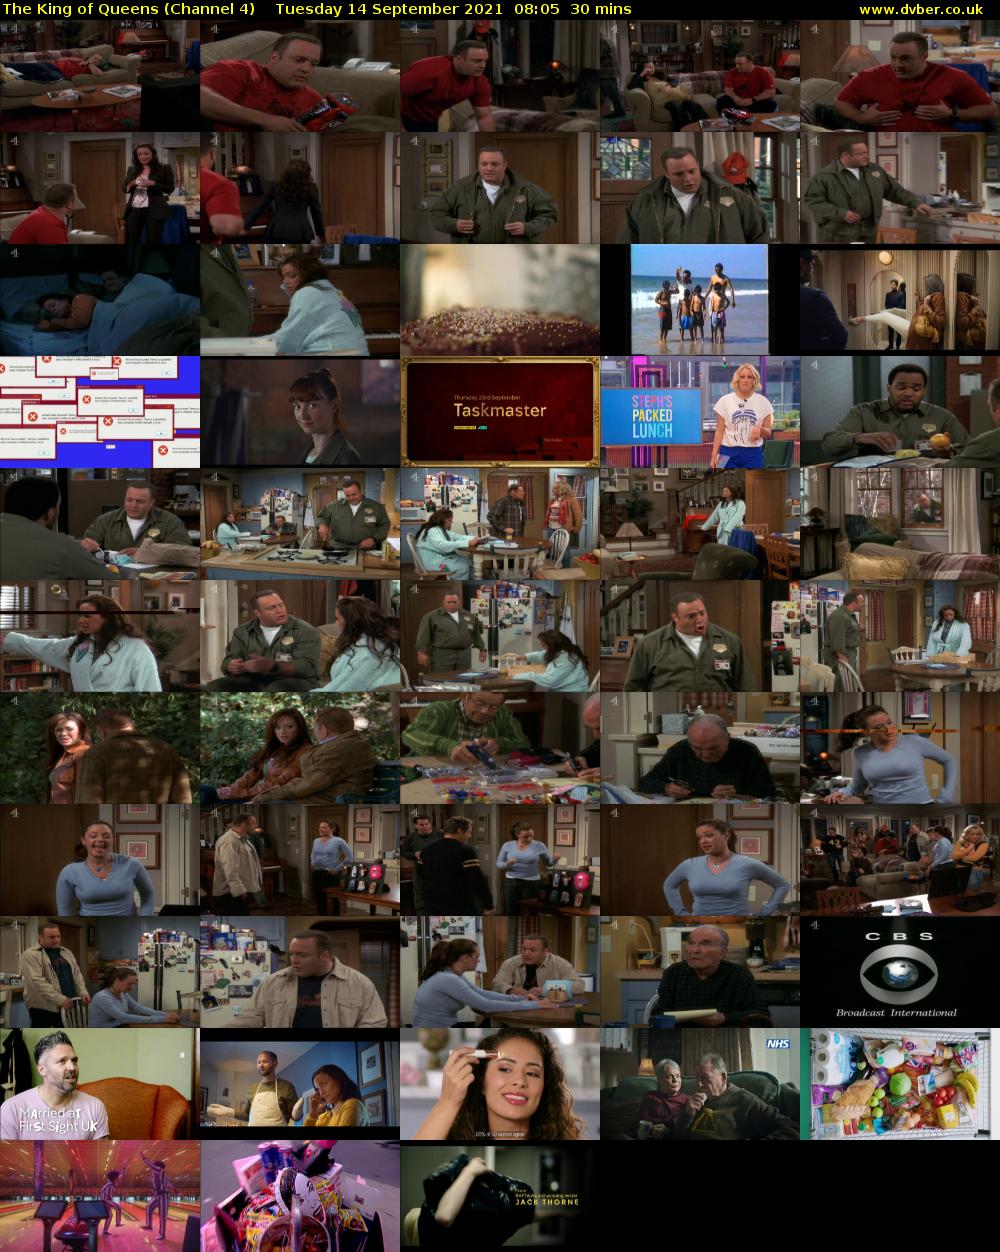 The King of Queens (Channel 4) Tuesday 14 September 2021 08:05 - 08:35